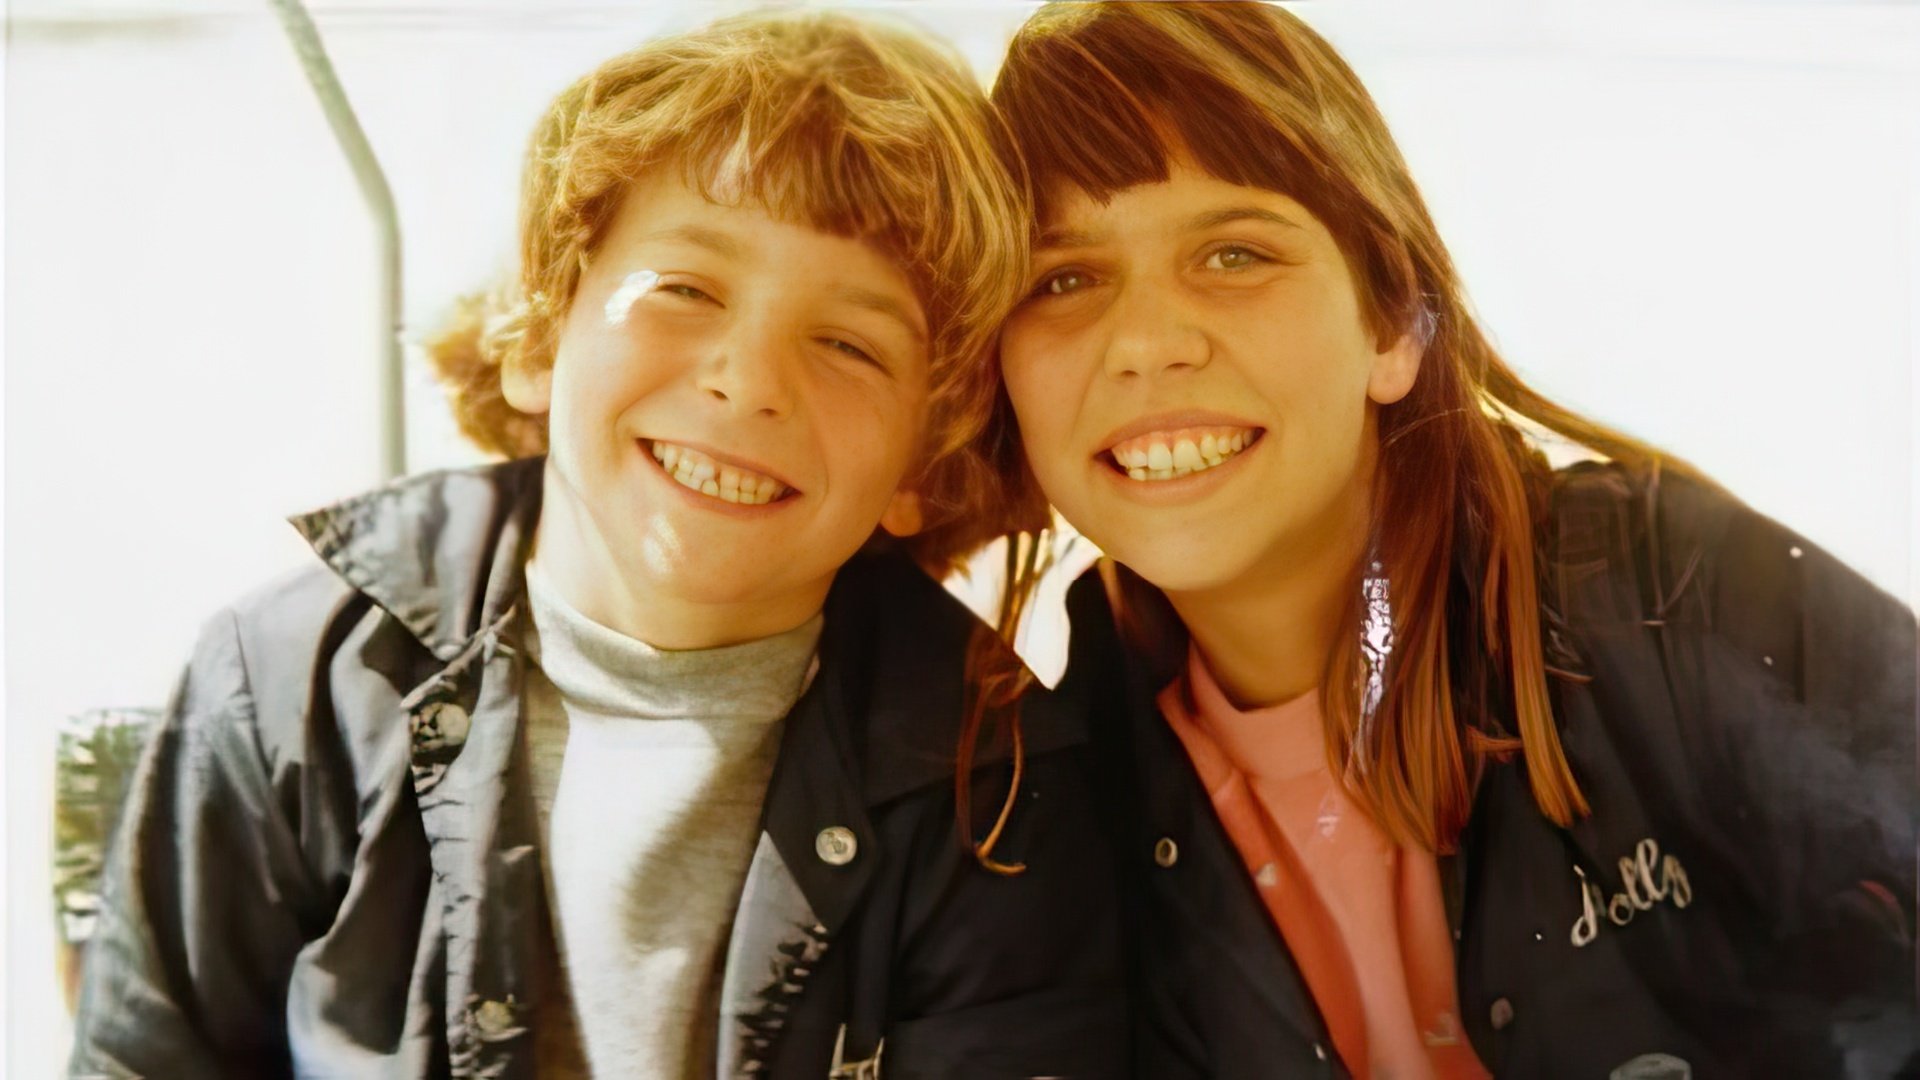 Little Bradley Cooper and his sister Holly